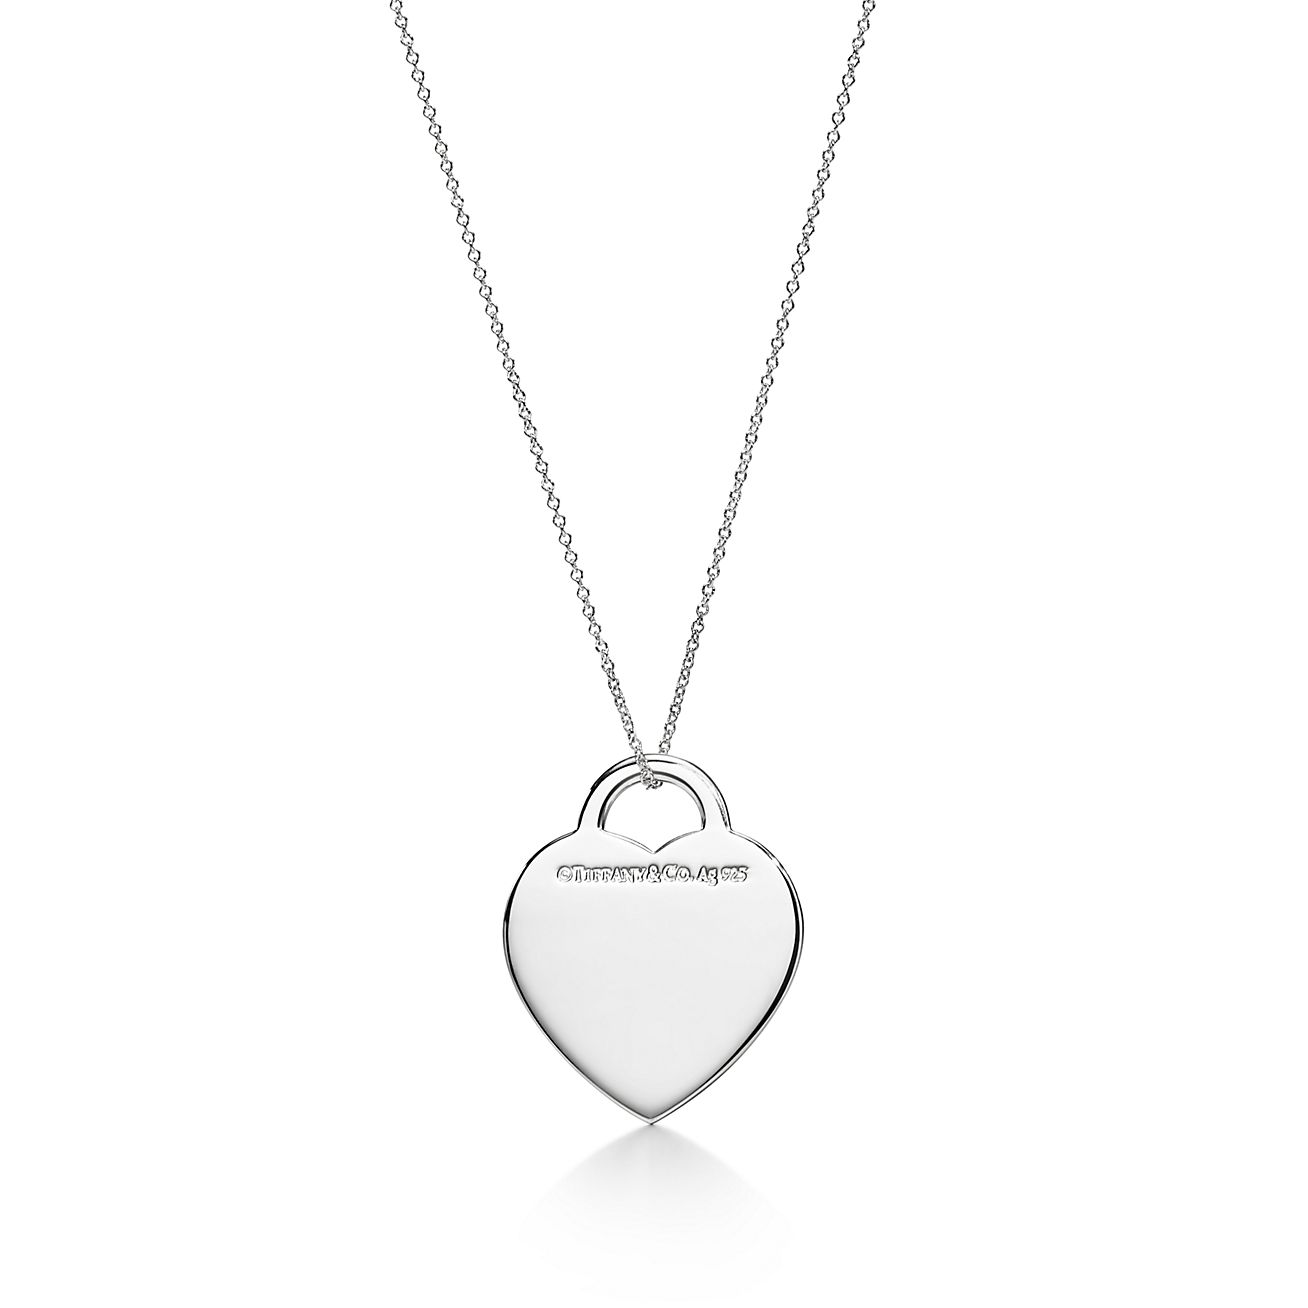 Tiffany - 925 Silver - Necklace with pendant - Catawiki